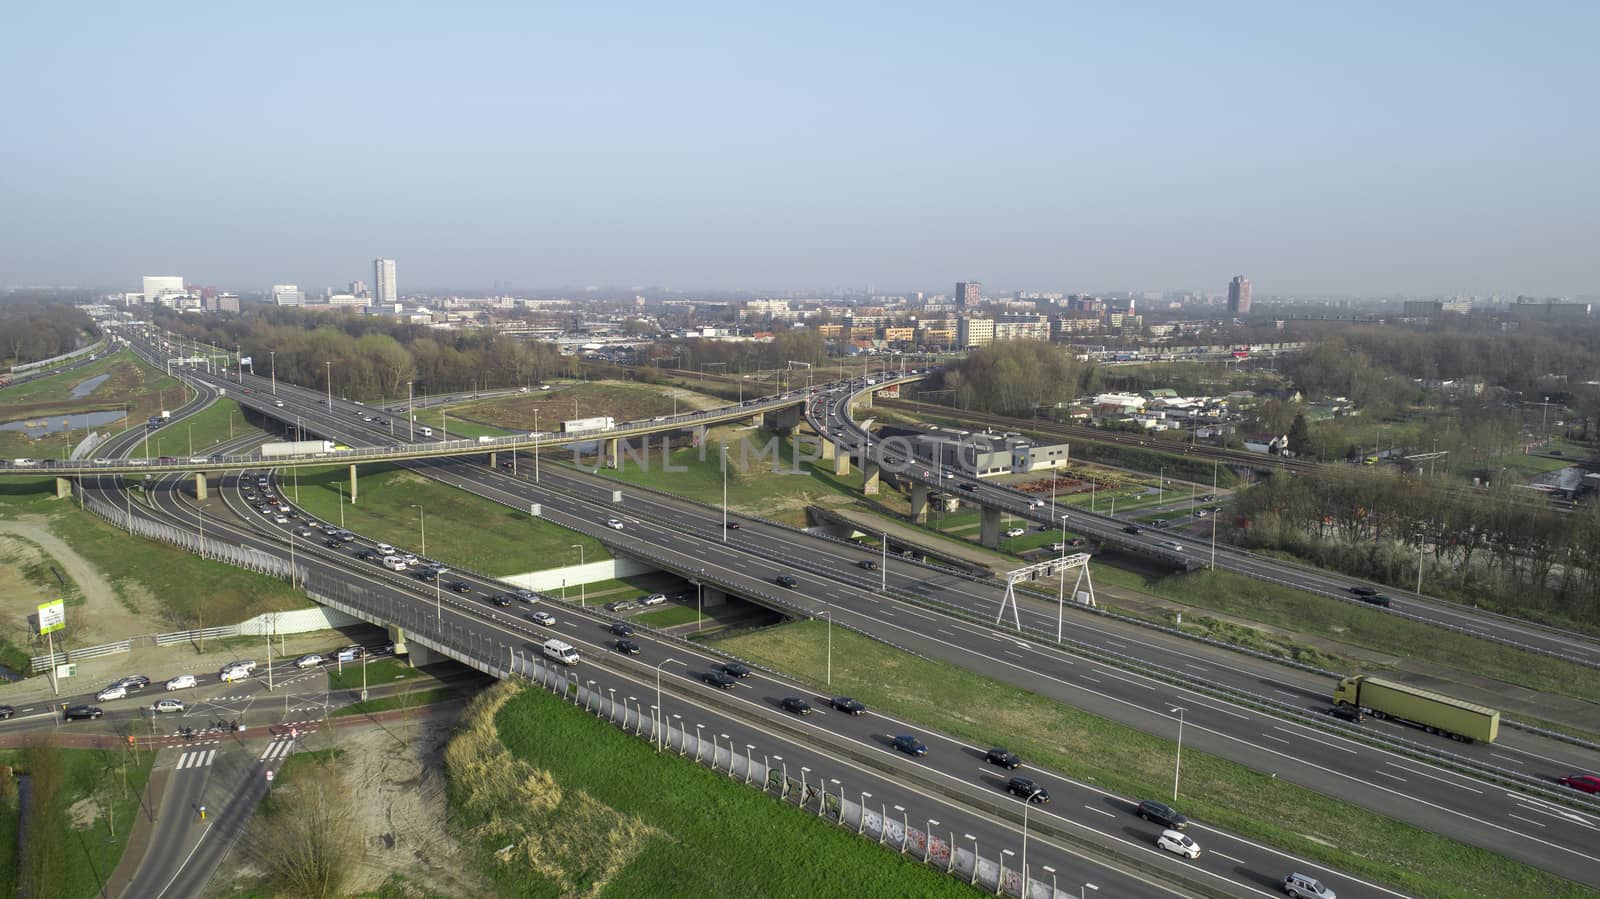 Aerial view of a massive highway intersection in Rotterdam, The  by Tjeerdkruse